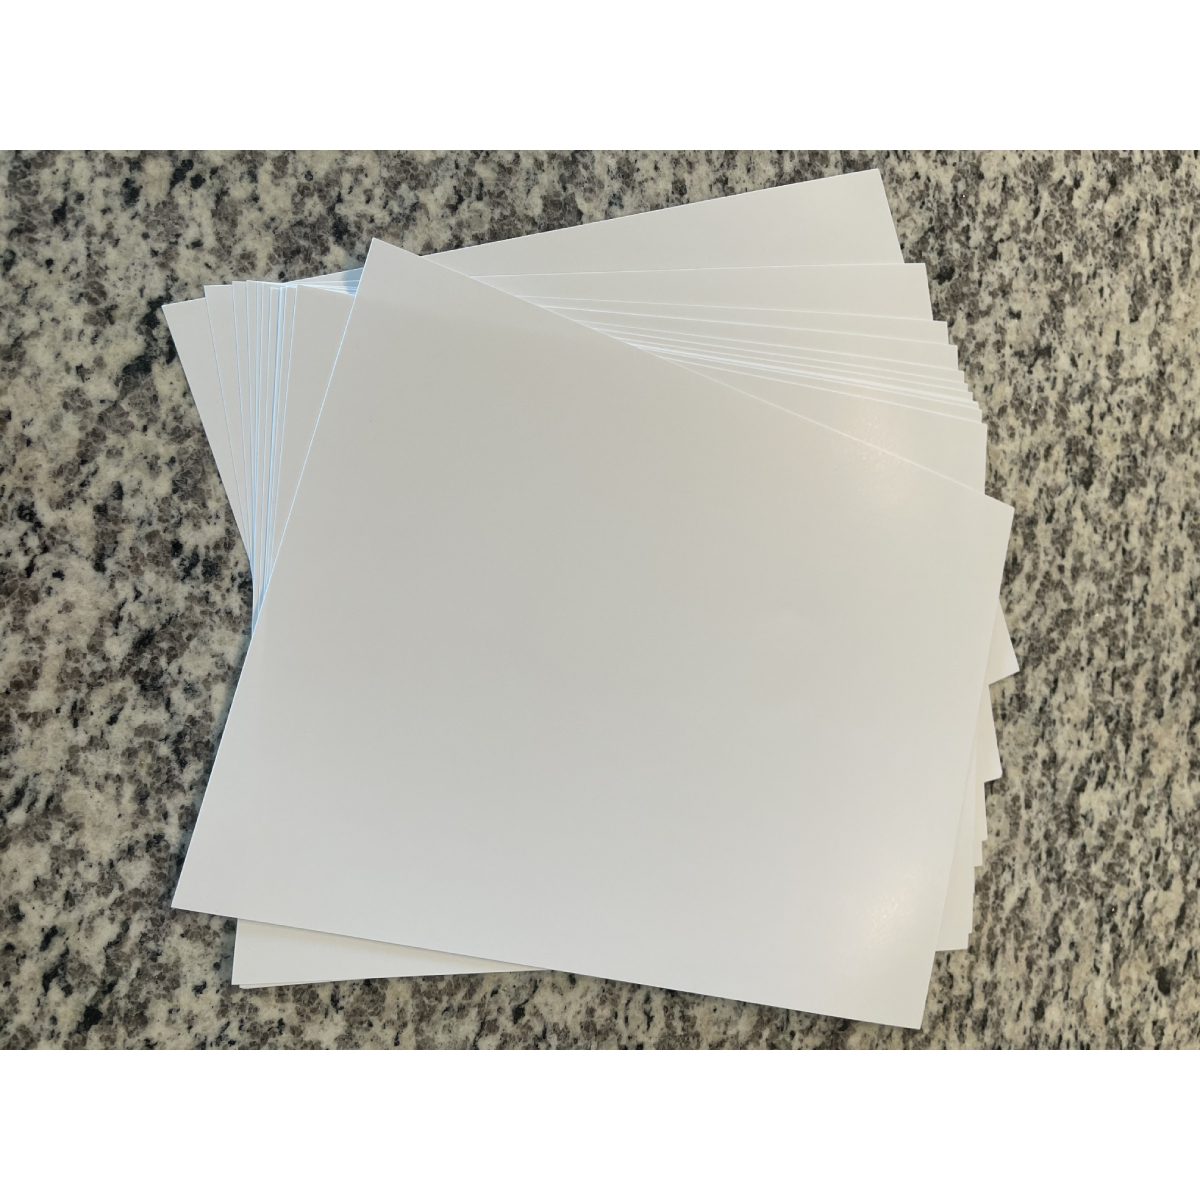 STICKER SHEETS - CARDSTOCK SALE While Supplies Last